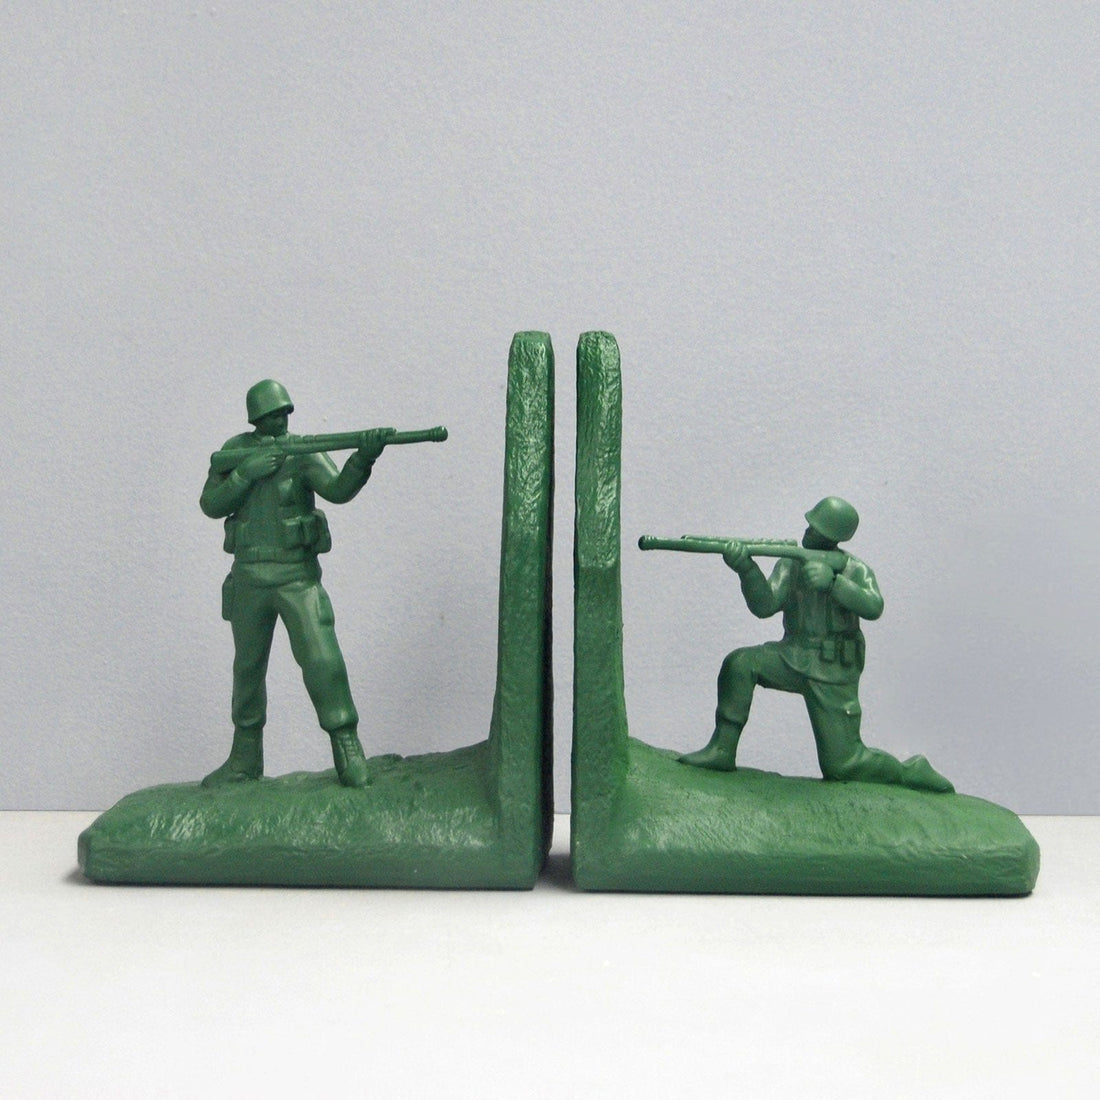 Soldier Bookends - Green.